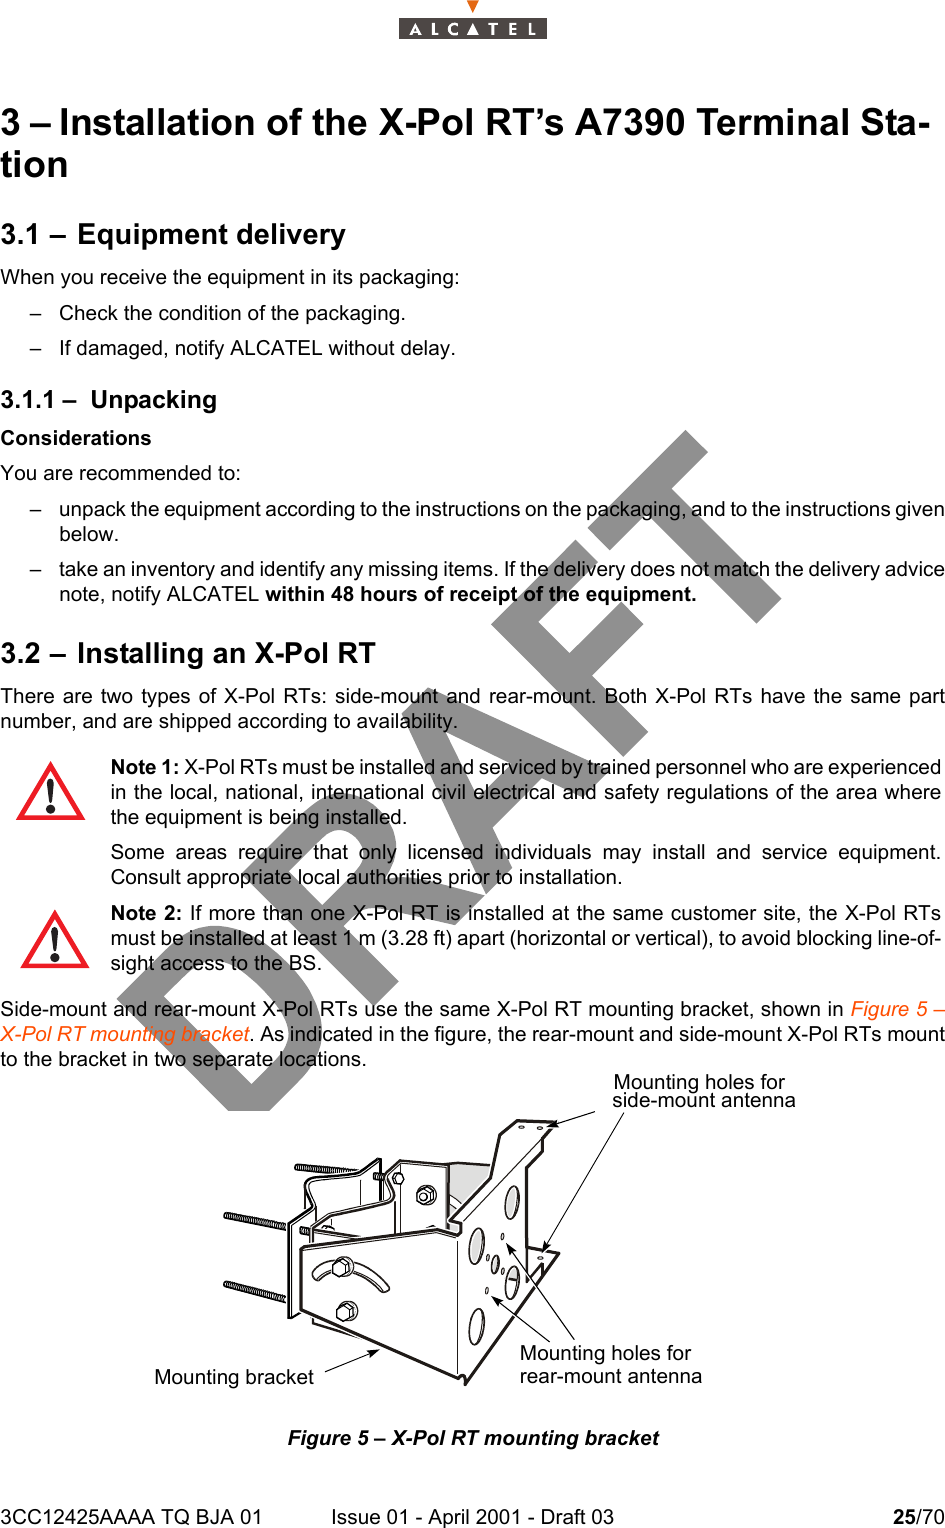 3CC12425AAAA TQ BJA 01 Issue 01 - April 2001 - Draft 03 25/70343 – Installation of the X-Pol RT’s A7390 Terminal Sta-tion3.1 – Equipment deliveryWhen you receive the equipment in its packaging:– Check the condition of the packaging.– If damaged, notify ALCATEL without delay.3.1.1 – UnpackingConsiderationsYou are recommended to:– unpack the equipment according to the instructions on the packaging, and to the instructions givenbelow.– take an inventory and identify any missing items. If the delivery does not match the delivery advicenote, notify ALCATEL within 48 hours of receipt of the equipment.3.2 – Installing an X-Pol RTThere are two types of X-Pol RTs: side-mount and rear-mount. Both X-Pol RTs have the same partnumber, and are shipped according to availability.Side-mount and rear-mount X-Pol RTs use the same X-Pol RT mounting bracket, shown in Figure 5 –X-Pol RT mounting bracket. As indicated in the figure, the rear-mount and side-mount X-Pol RTs mountto the bracket in two separate locations.Figure 5 – X-Pol RT mounting bracketNote 1: X-Pol RTs must be installed and serviced by trained personnel who are experiencedin the local, national, international civil electrical and safety regulations of the area wherethe equipment is being installed.Some areas require that only licensed individuals may install and service equipment.Consult appropriate local authorities prior to installation.Note 2: If more than one X-Pol RT is installed at the same customer site, the X-Pol RTsmust be installed at least 1 m (3.28 ft) apart (horizontal or vertical), to avoid blocking line-of-sight access to the BS.Mounting holes forMounting holes forrear-mount antennaMounting bracketside-mount antenna